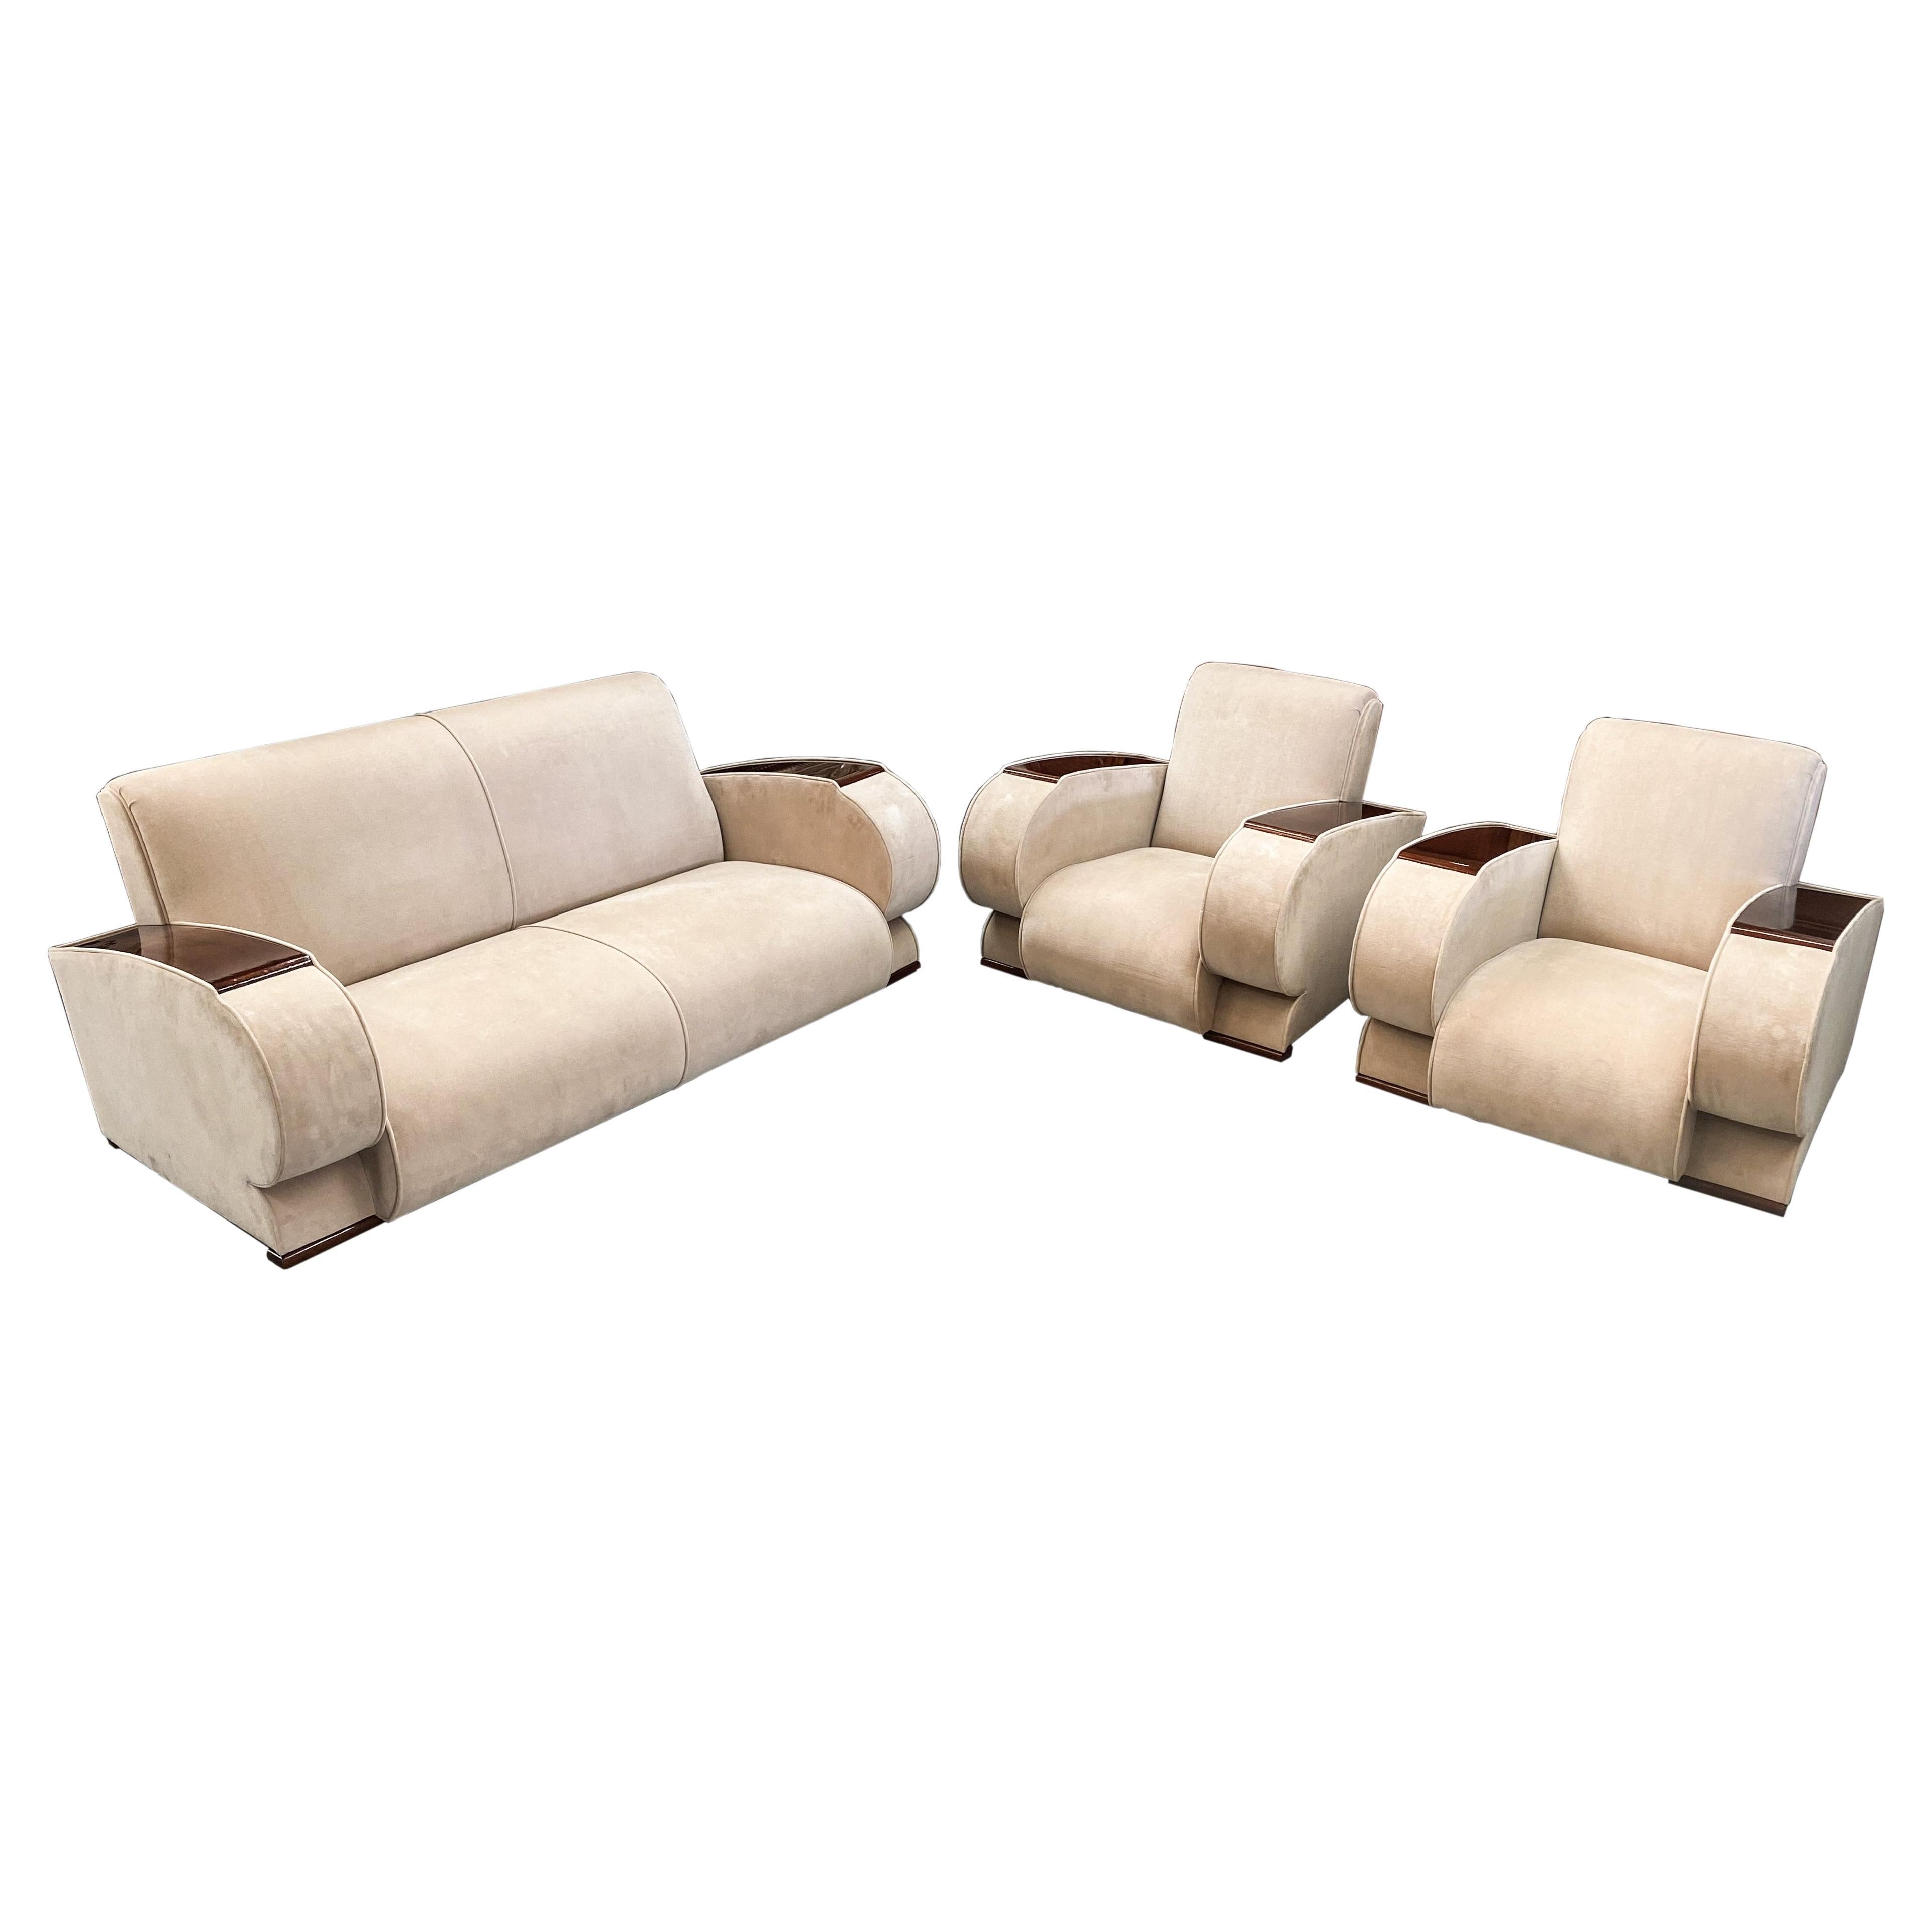 French Art Deco Living Room Set in Beige Suede & Rosewood Armrests, 3 Pieces  For Sale